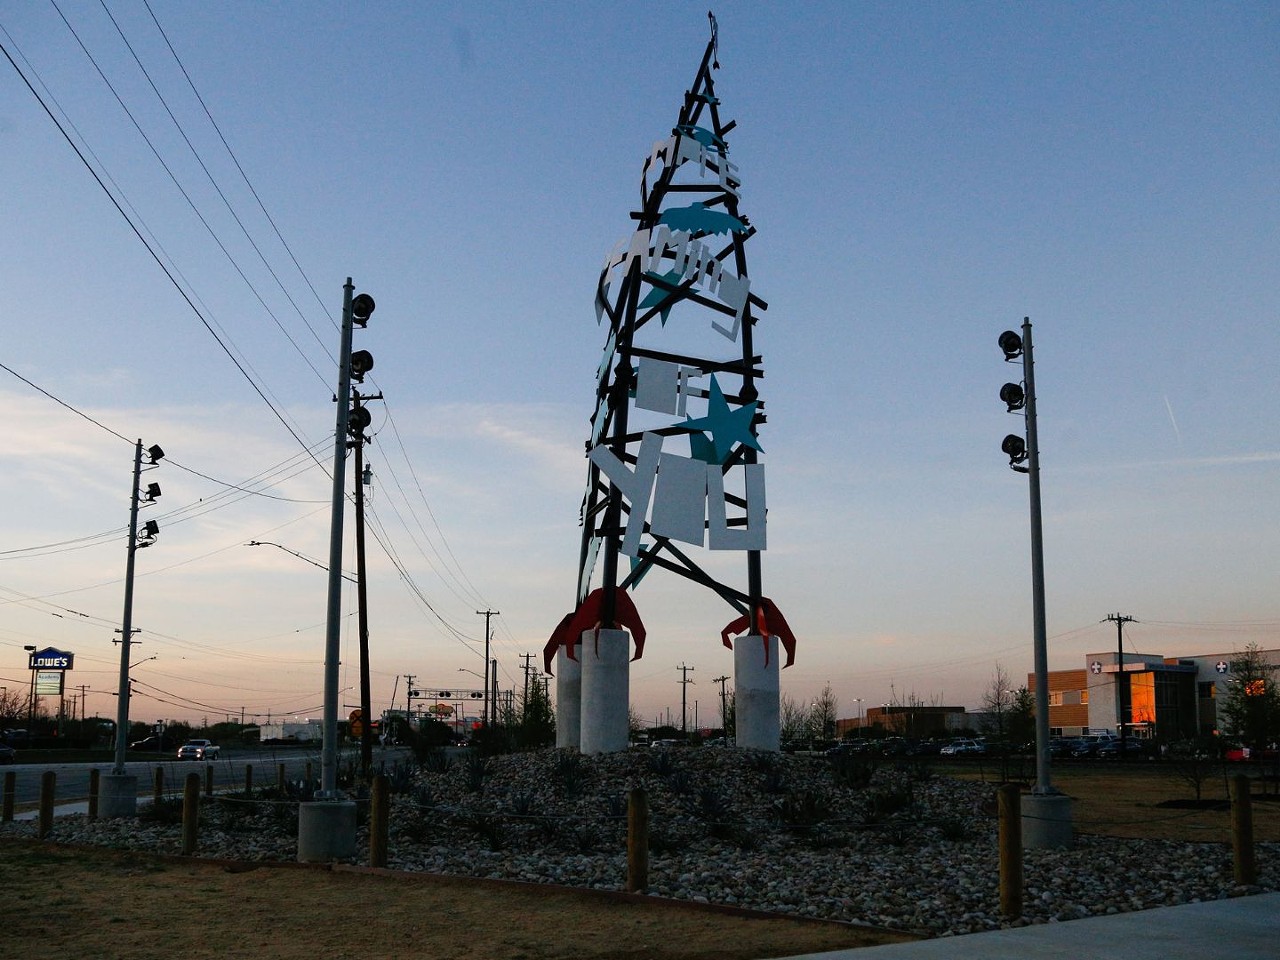 Dream Song Tower
I-35 Access Road at S. Zarzamora St.
Artist: Cruz Ortiz
Cruz Ortiz's dramatic sculpture recalls a strange hybrid of a radio tower, a rocket ship and a tepee tricked out with his graphic signatures and visual nods to Selena (the words “Siempre Dreaming of You”) and the urban legends of the Donkey Lady and the chicken-footed Dancing Devil.